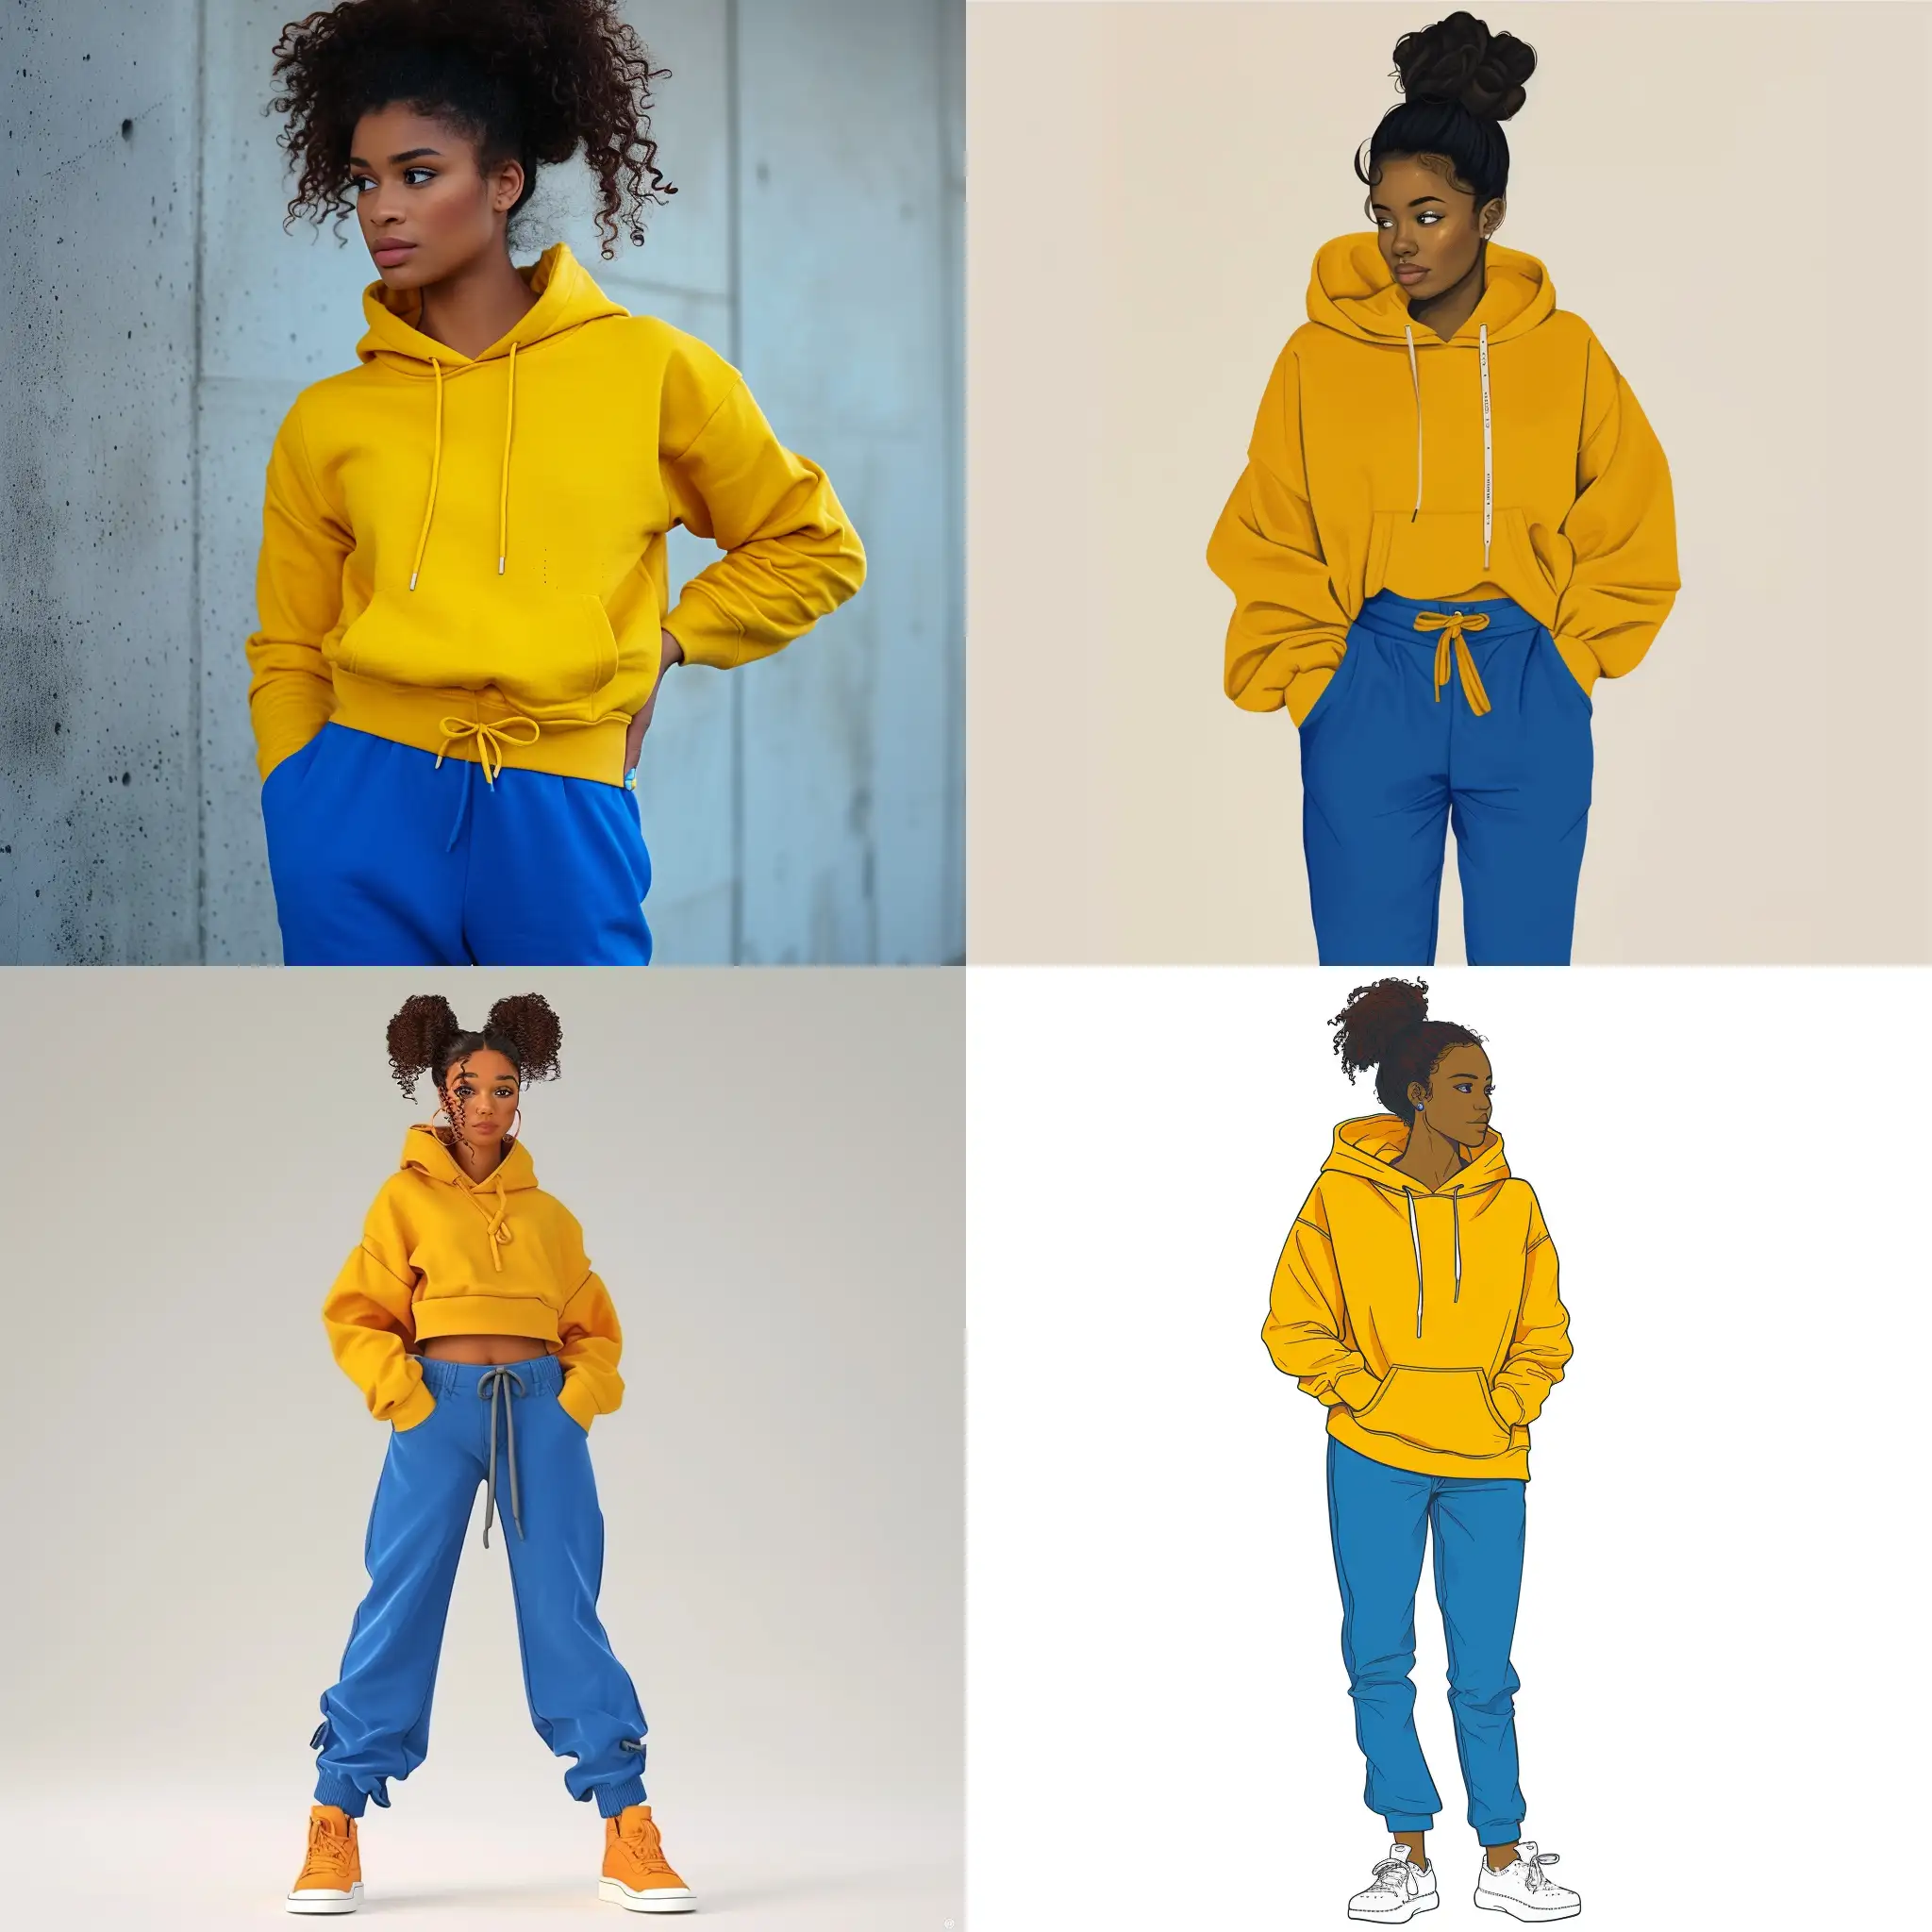 Stylish-Woman-in-Blue-Pants-and-Yellow-Hoodie